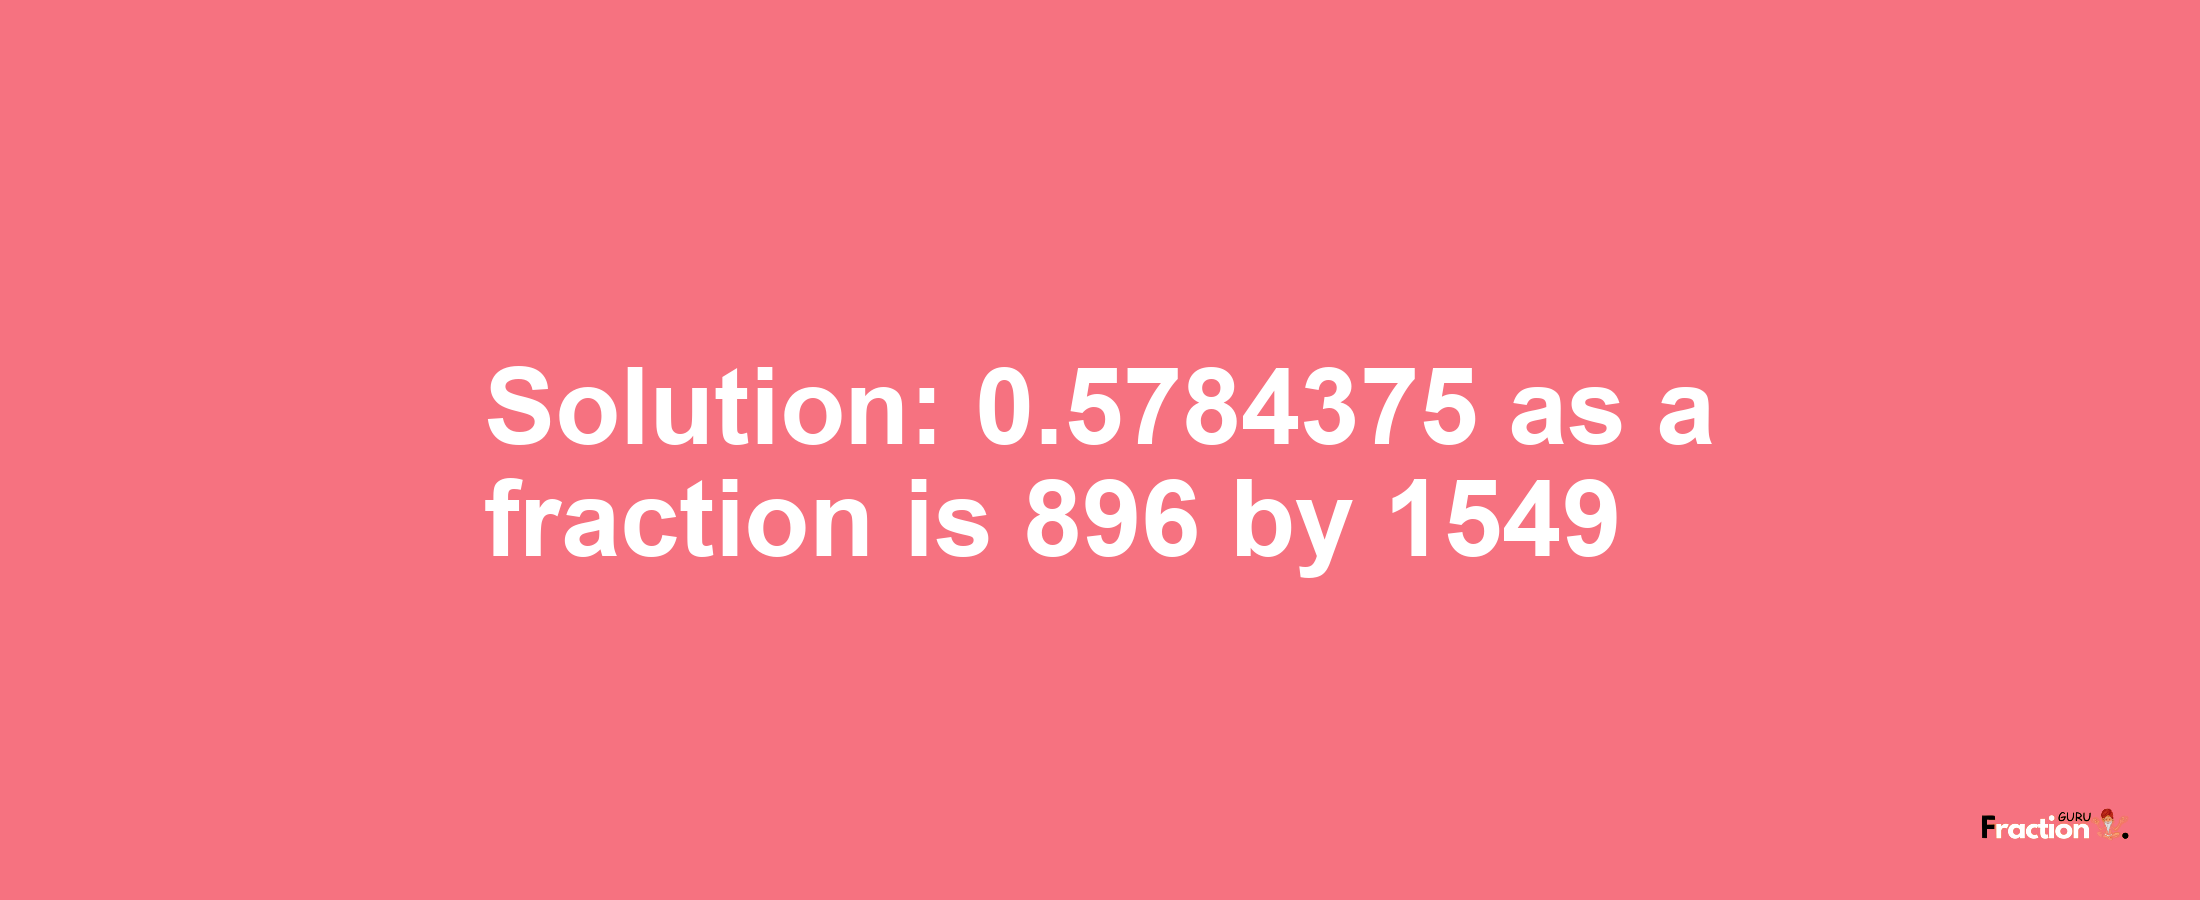 Solution:0.5784375 as a fraction is 896/1549